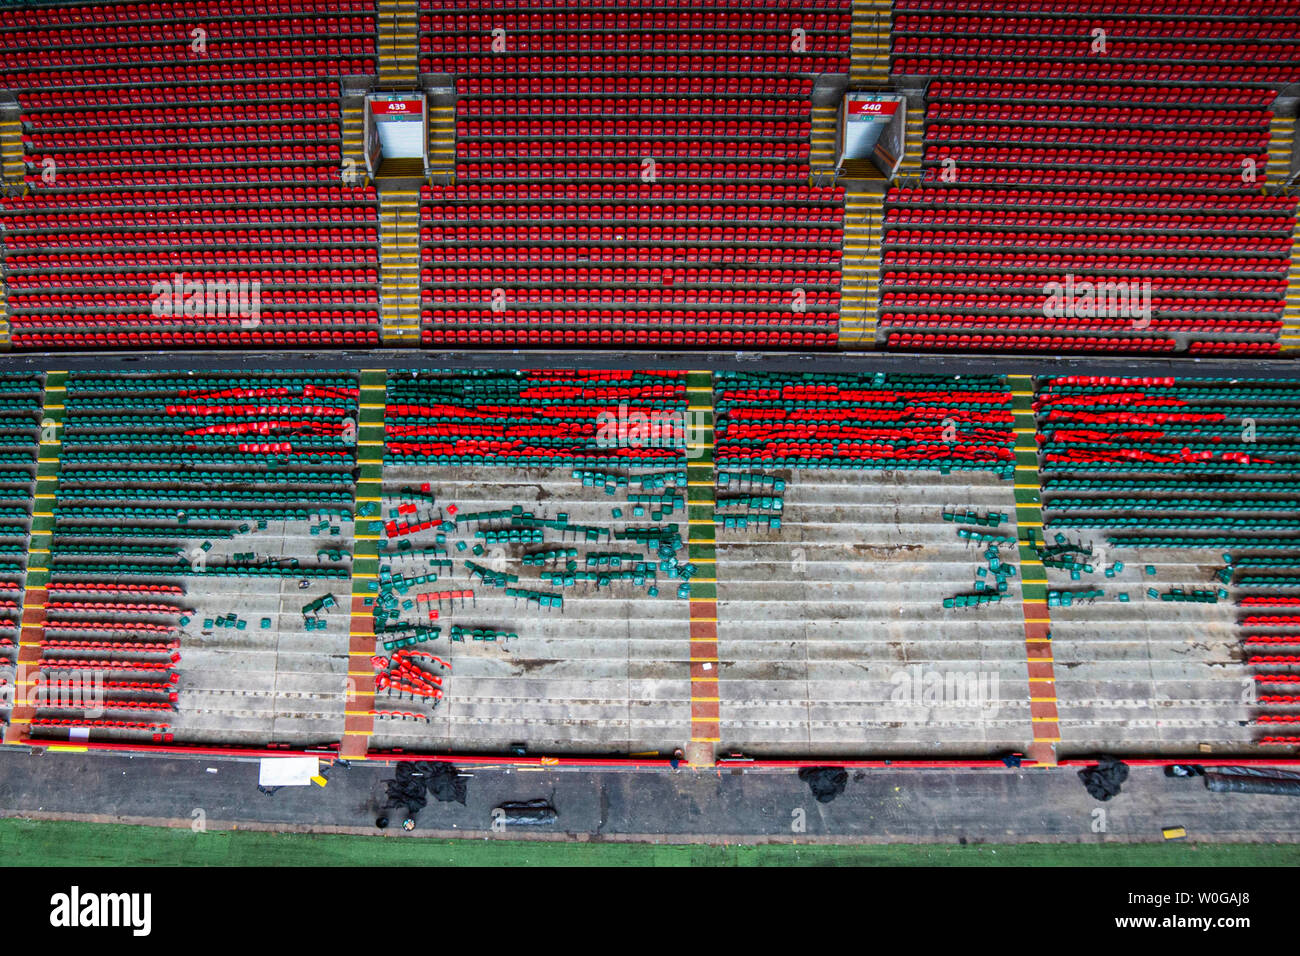 Principality Stadium seating in the process of being reinstalled after temporary removal for a concert, June 2019. Stock Photo